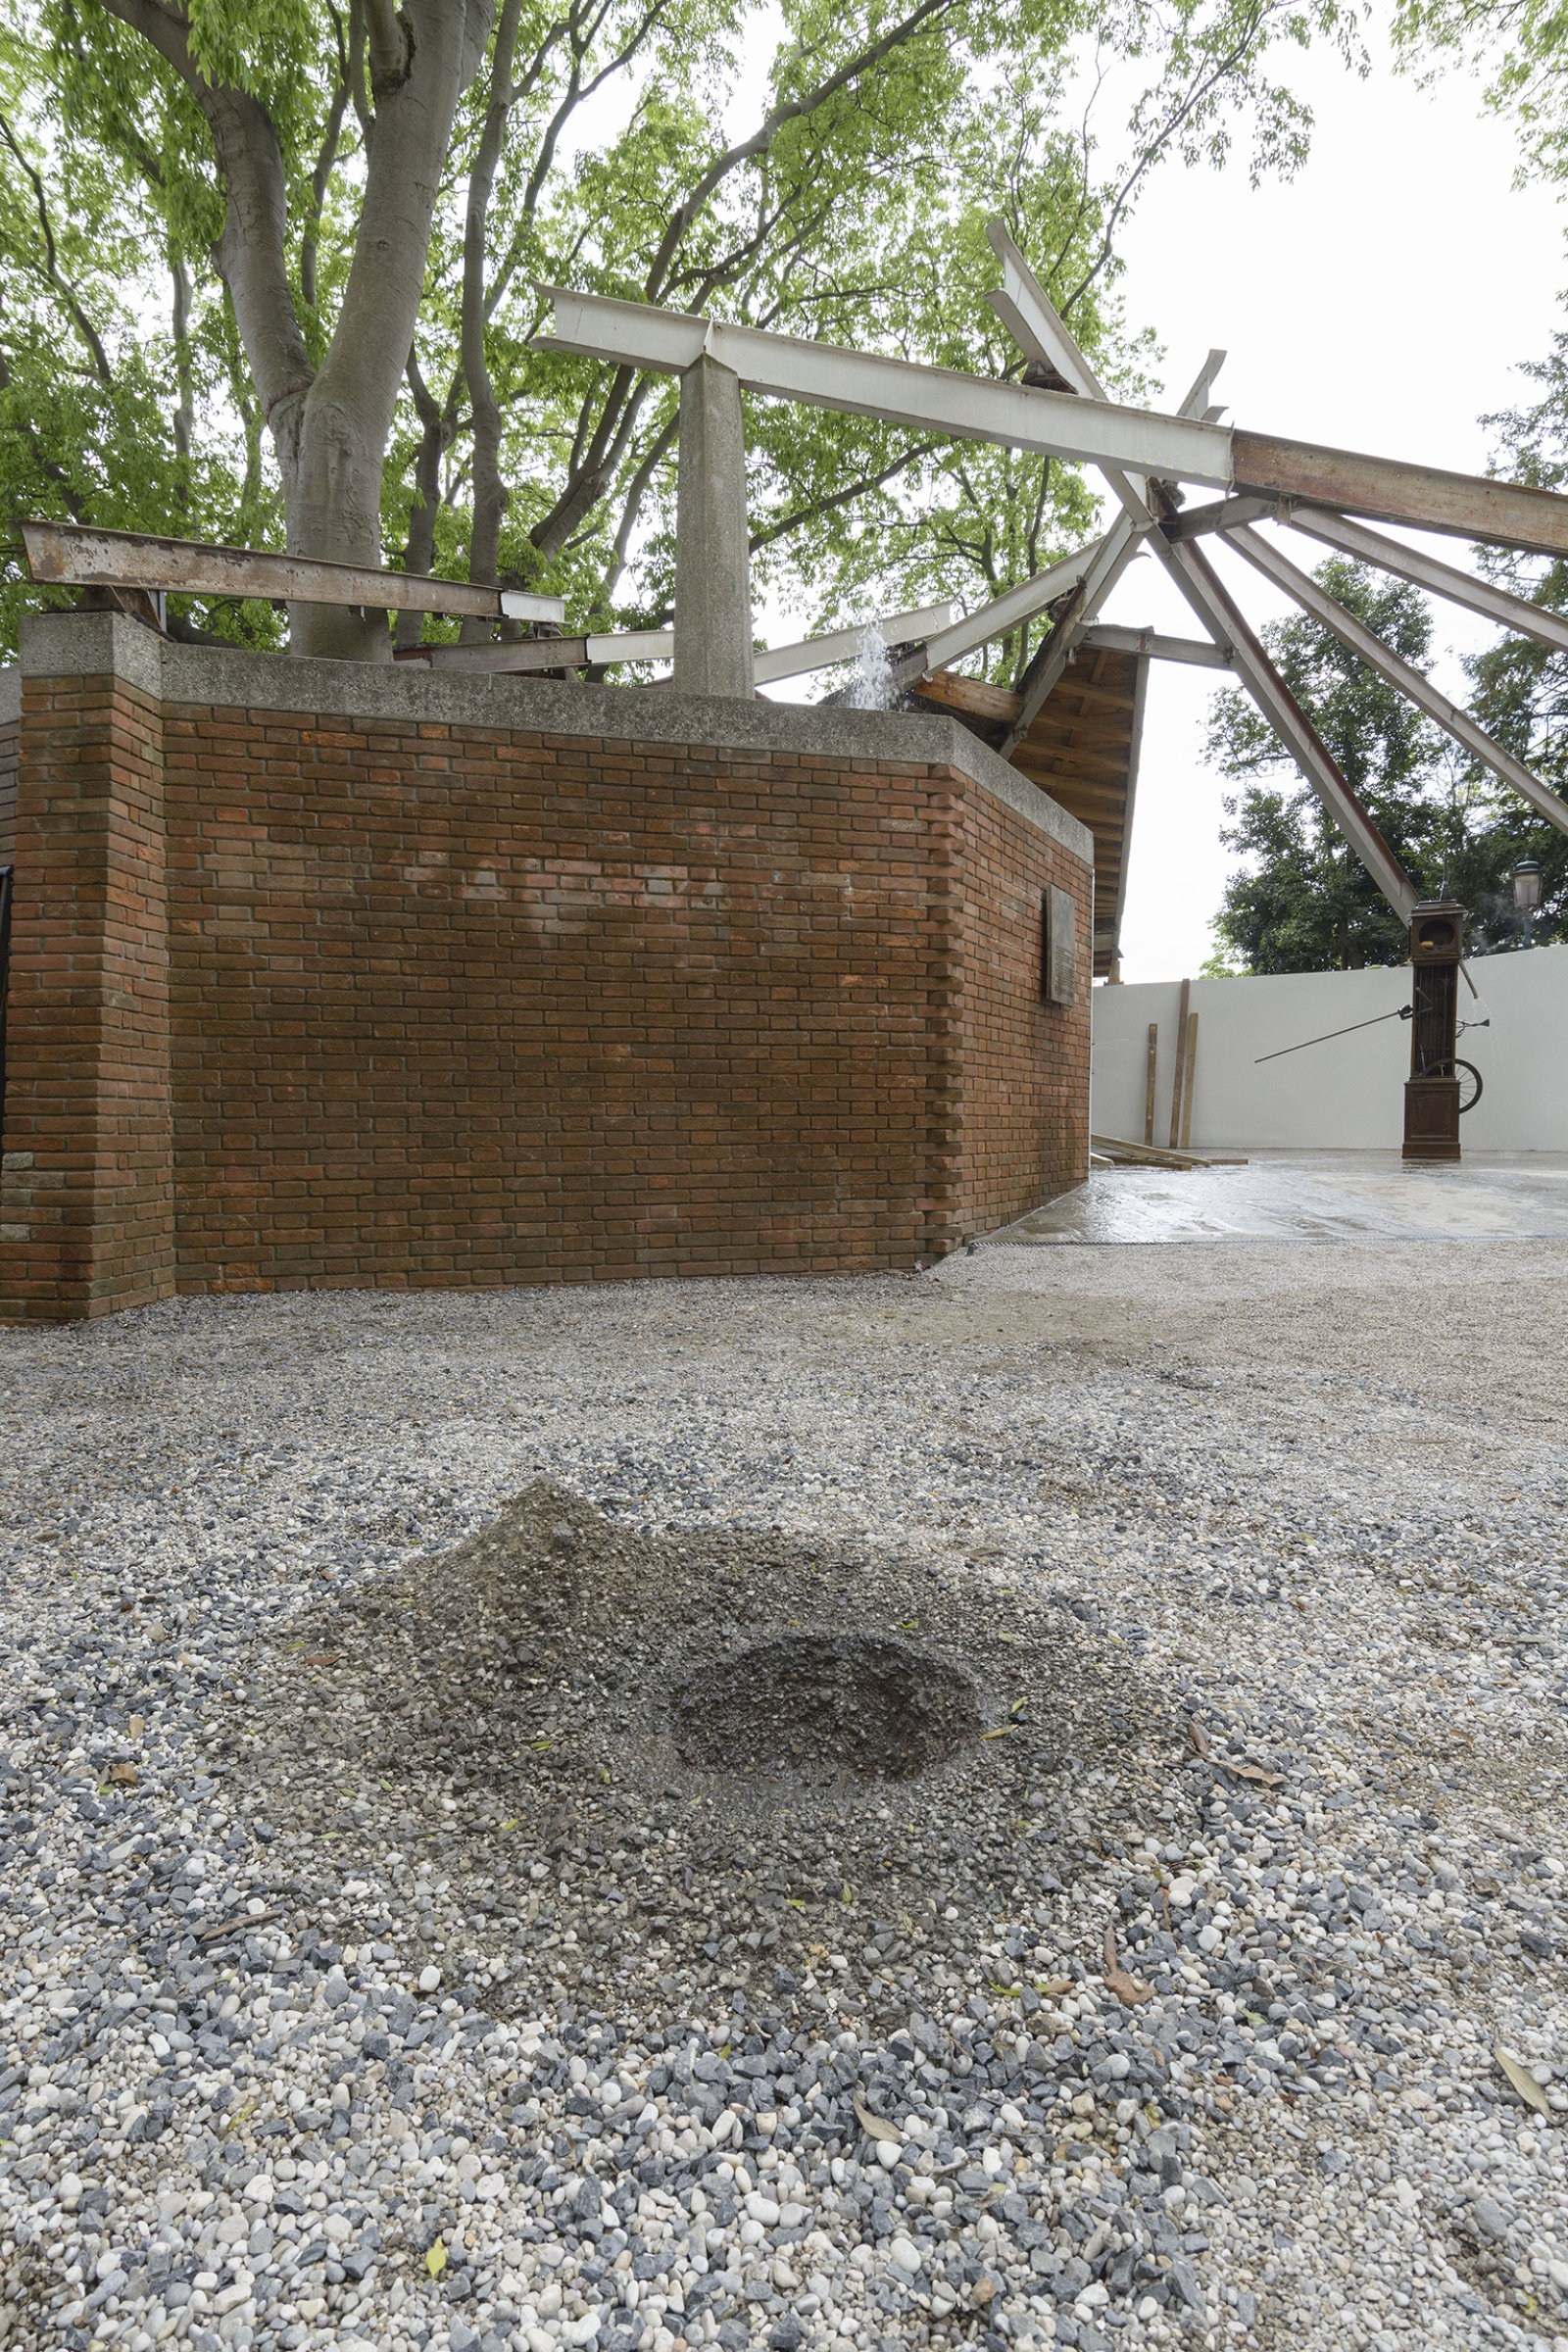 Geoffrey Farmer, Drinking Fountain, 2017, tombak cast of a hole in the ground, sensor, water technics, 12 x 63 x 55 in. (30 x 160 x 140 cm). Installation view, A way out of the mirror, Canada Pavilion, 57th Venice Biennale, Venice, Italy